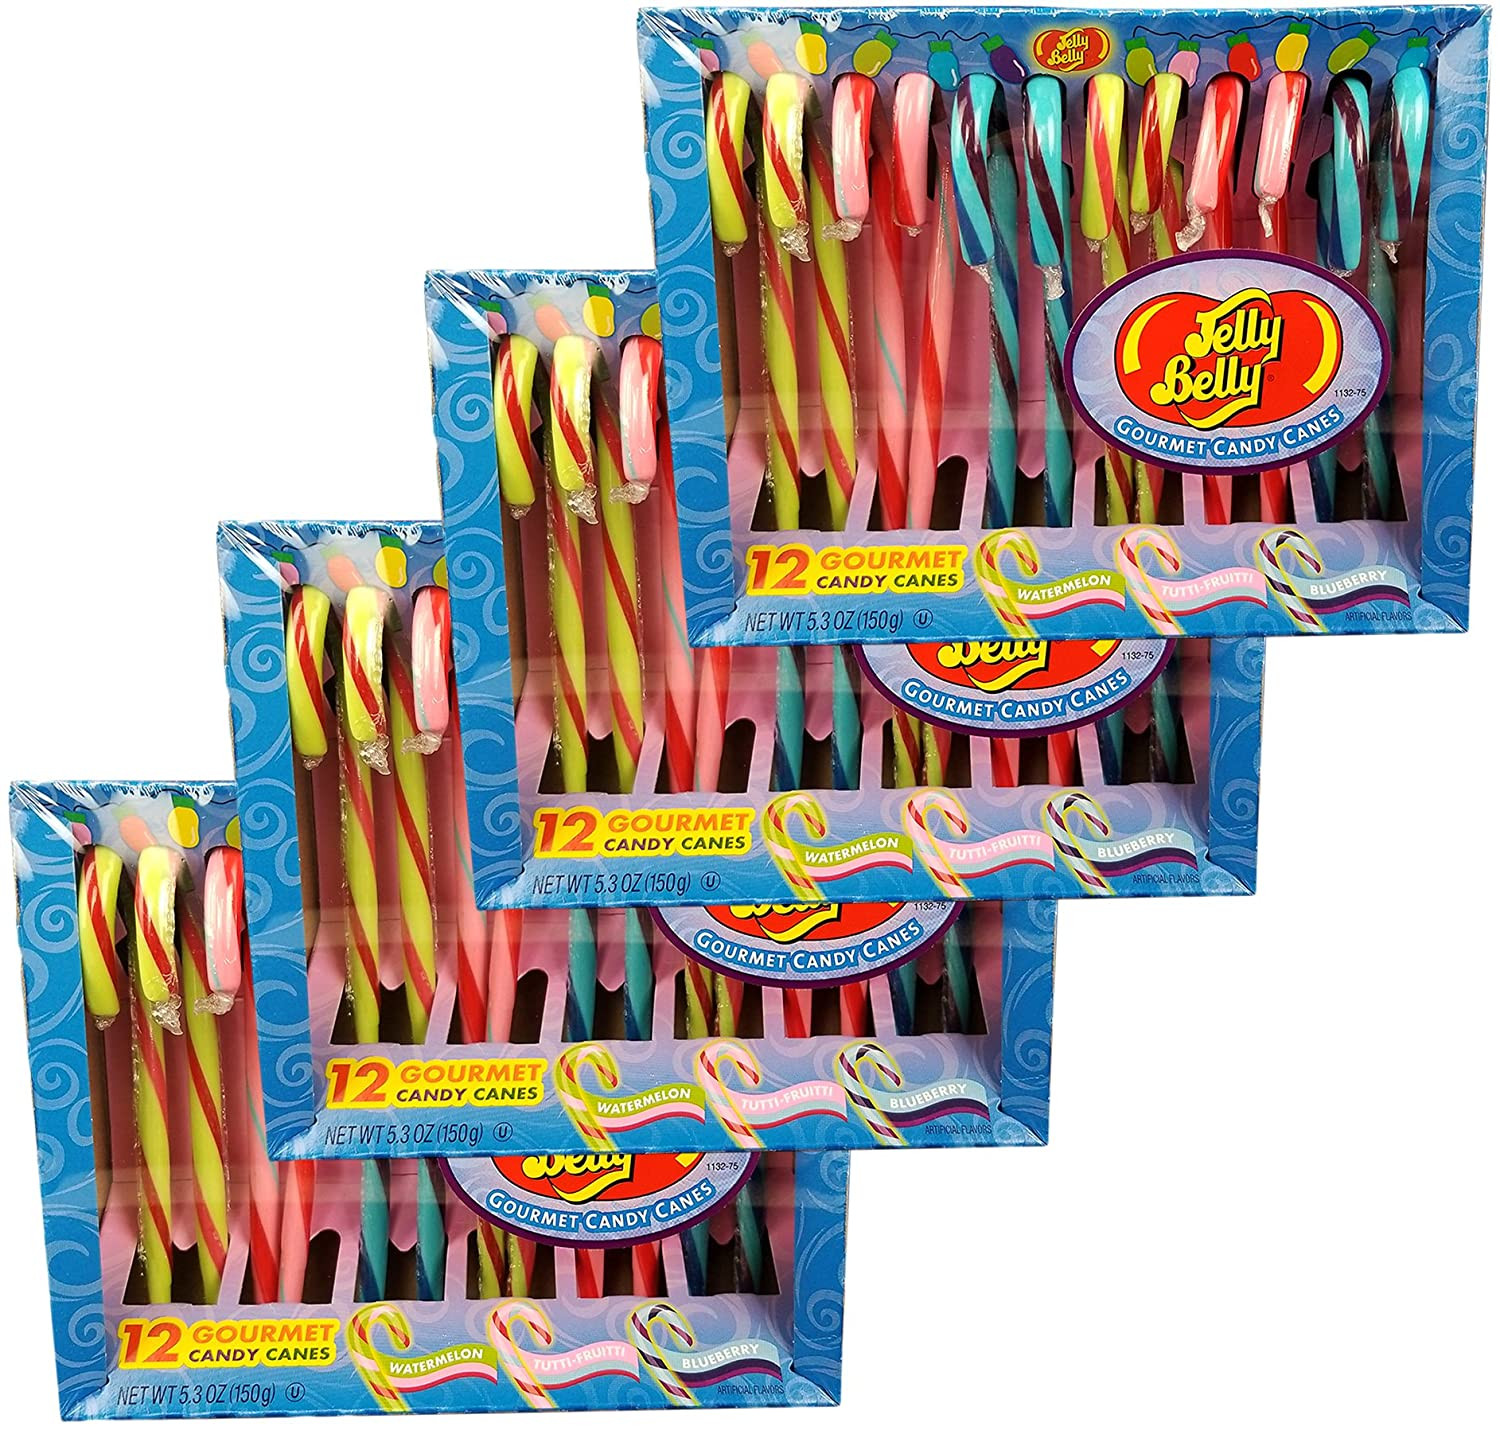 Gourmet Christmas Candy
 Jelly Belly Gourmet Candy Canes 6 oz 12 Ct for Christmas